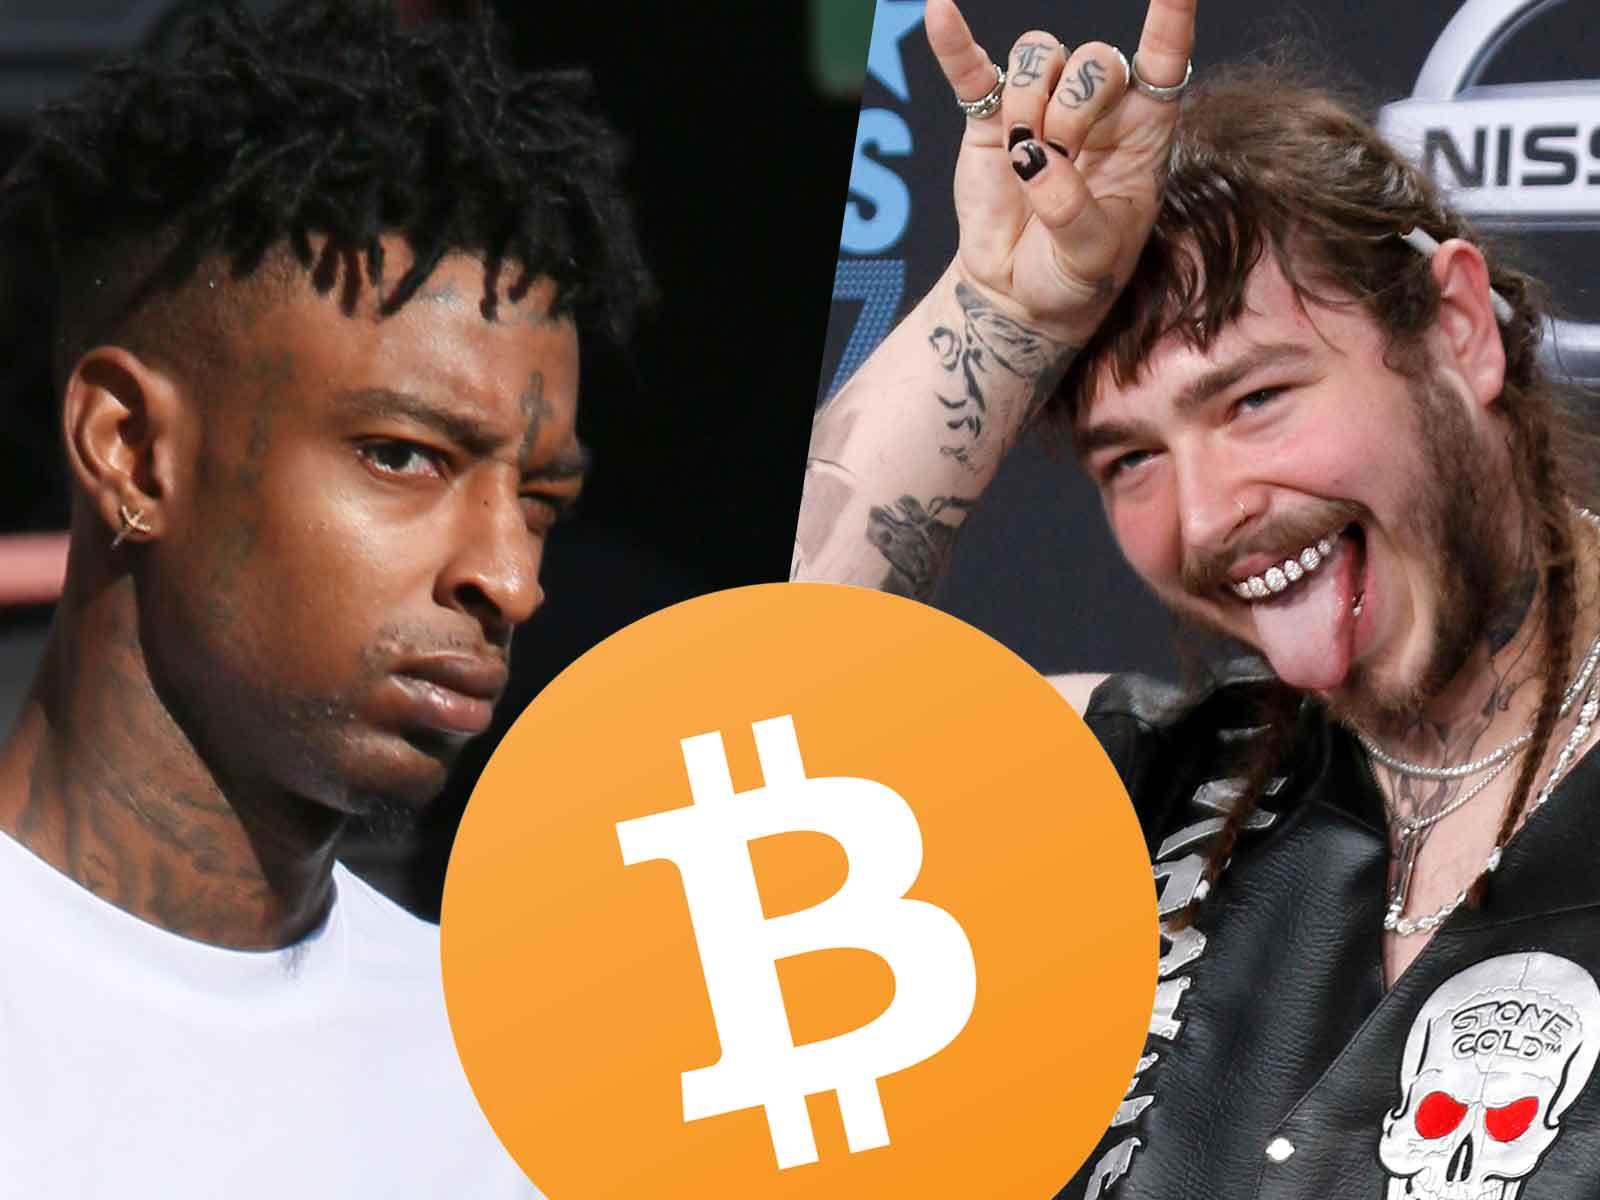 21 Savage & Post Malone: Bitcoin Tips for Strippers Accepted at NYE Party